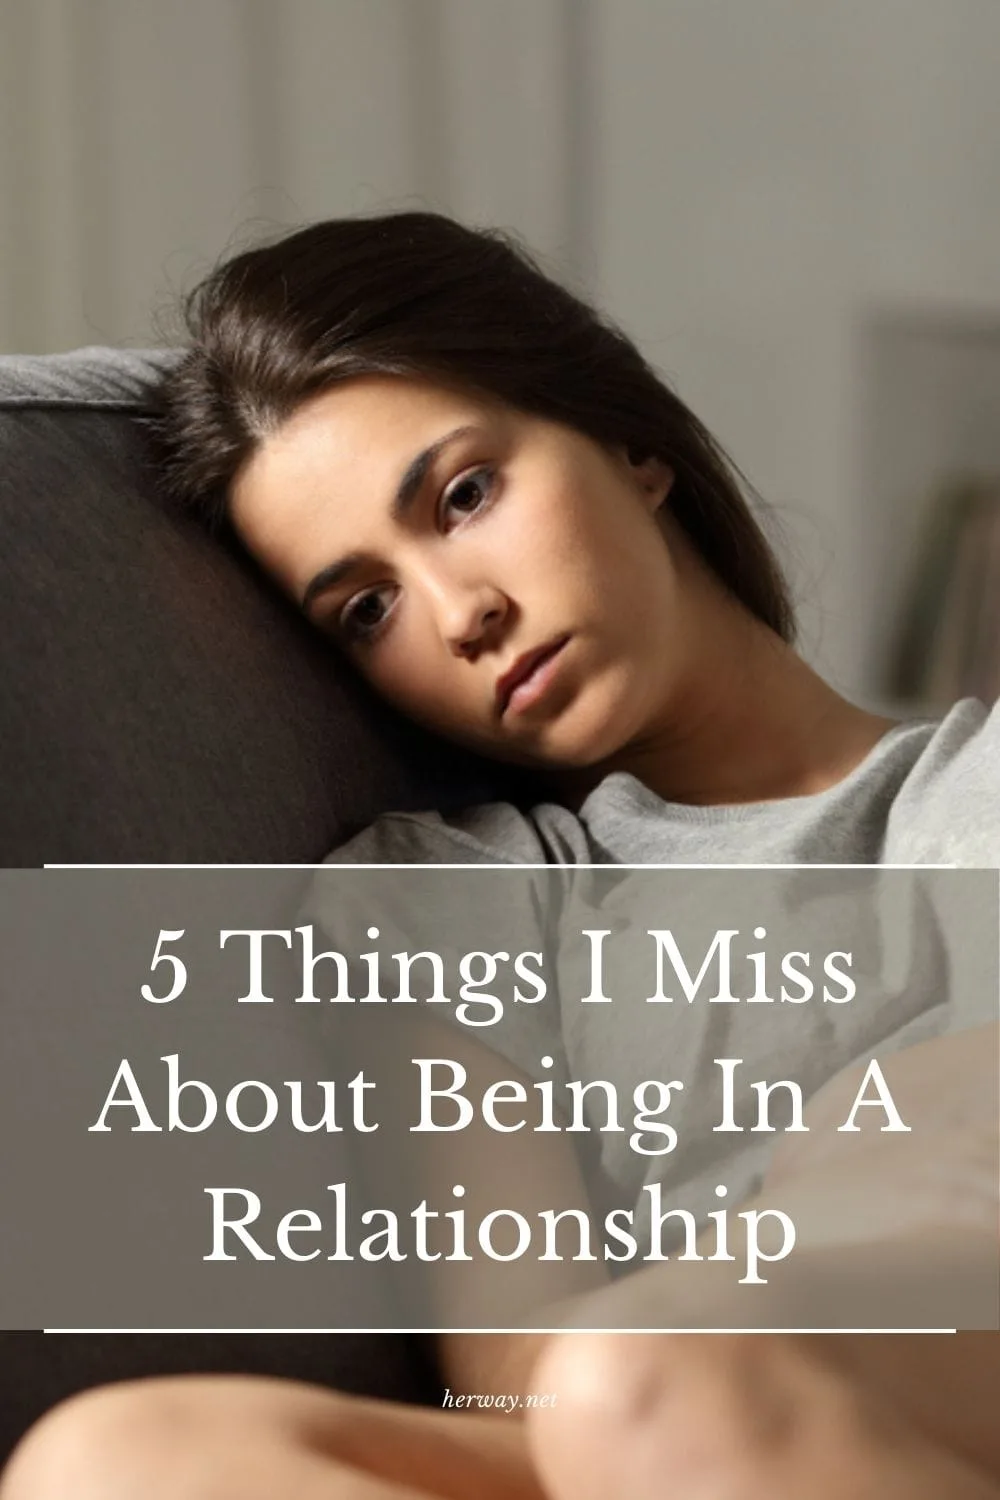 5 Things I Miss About Being In A Relationship